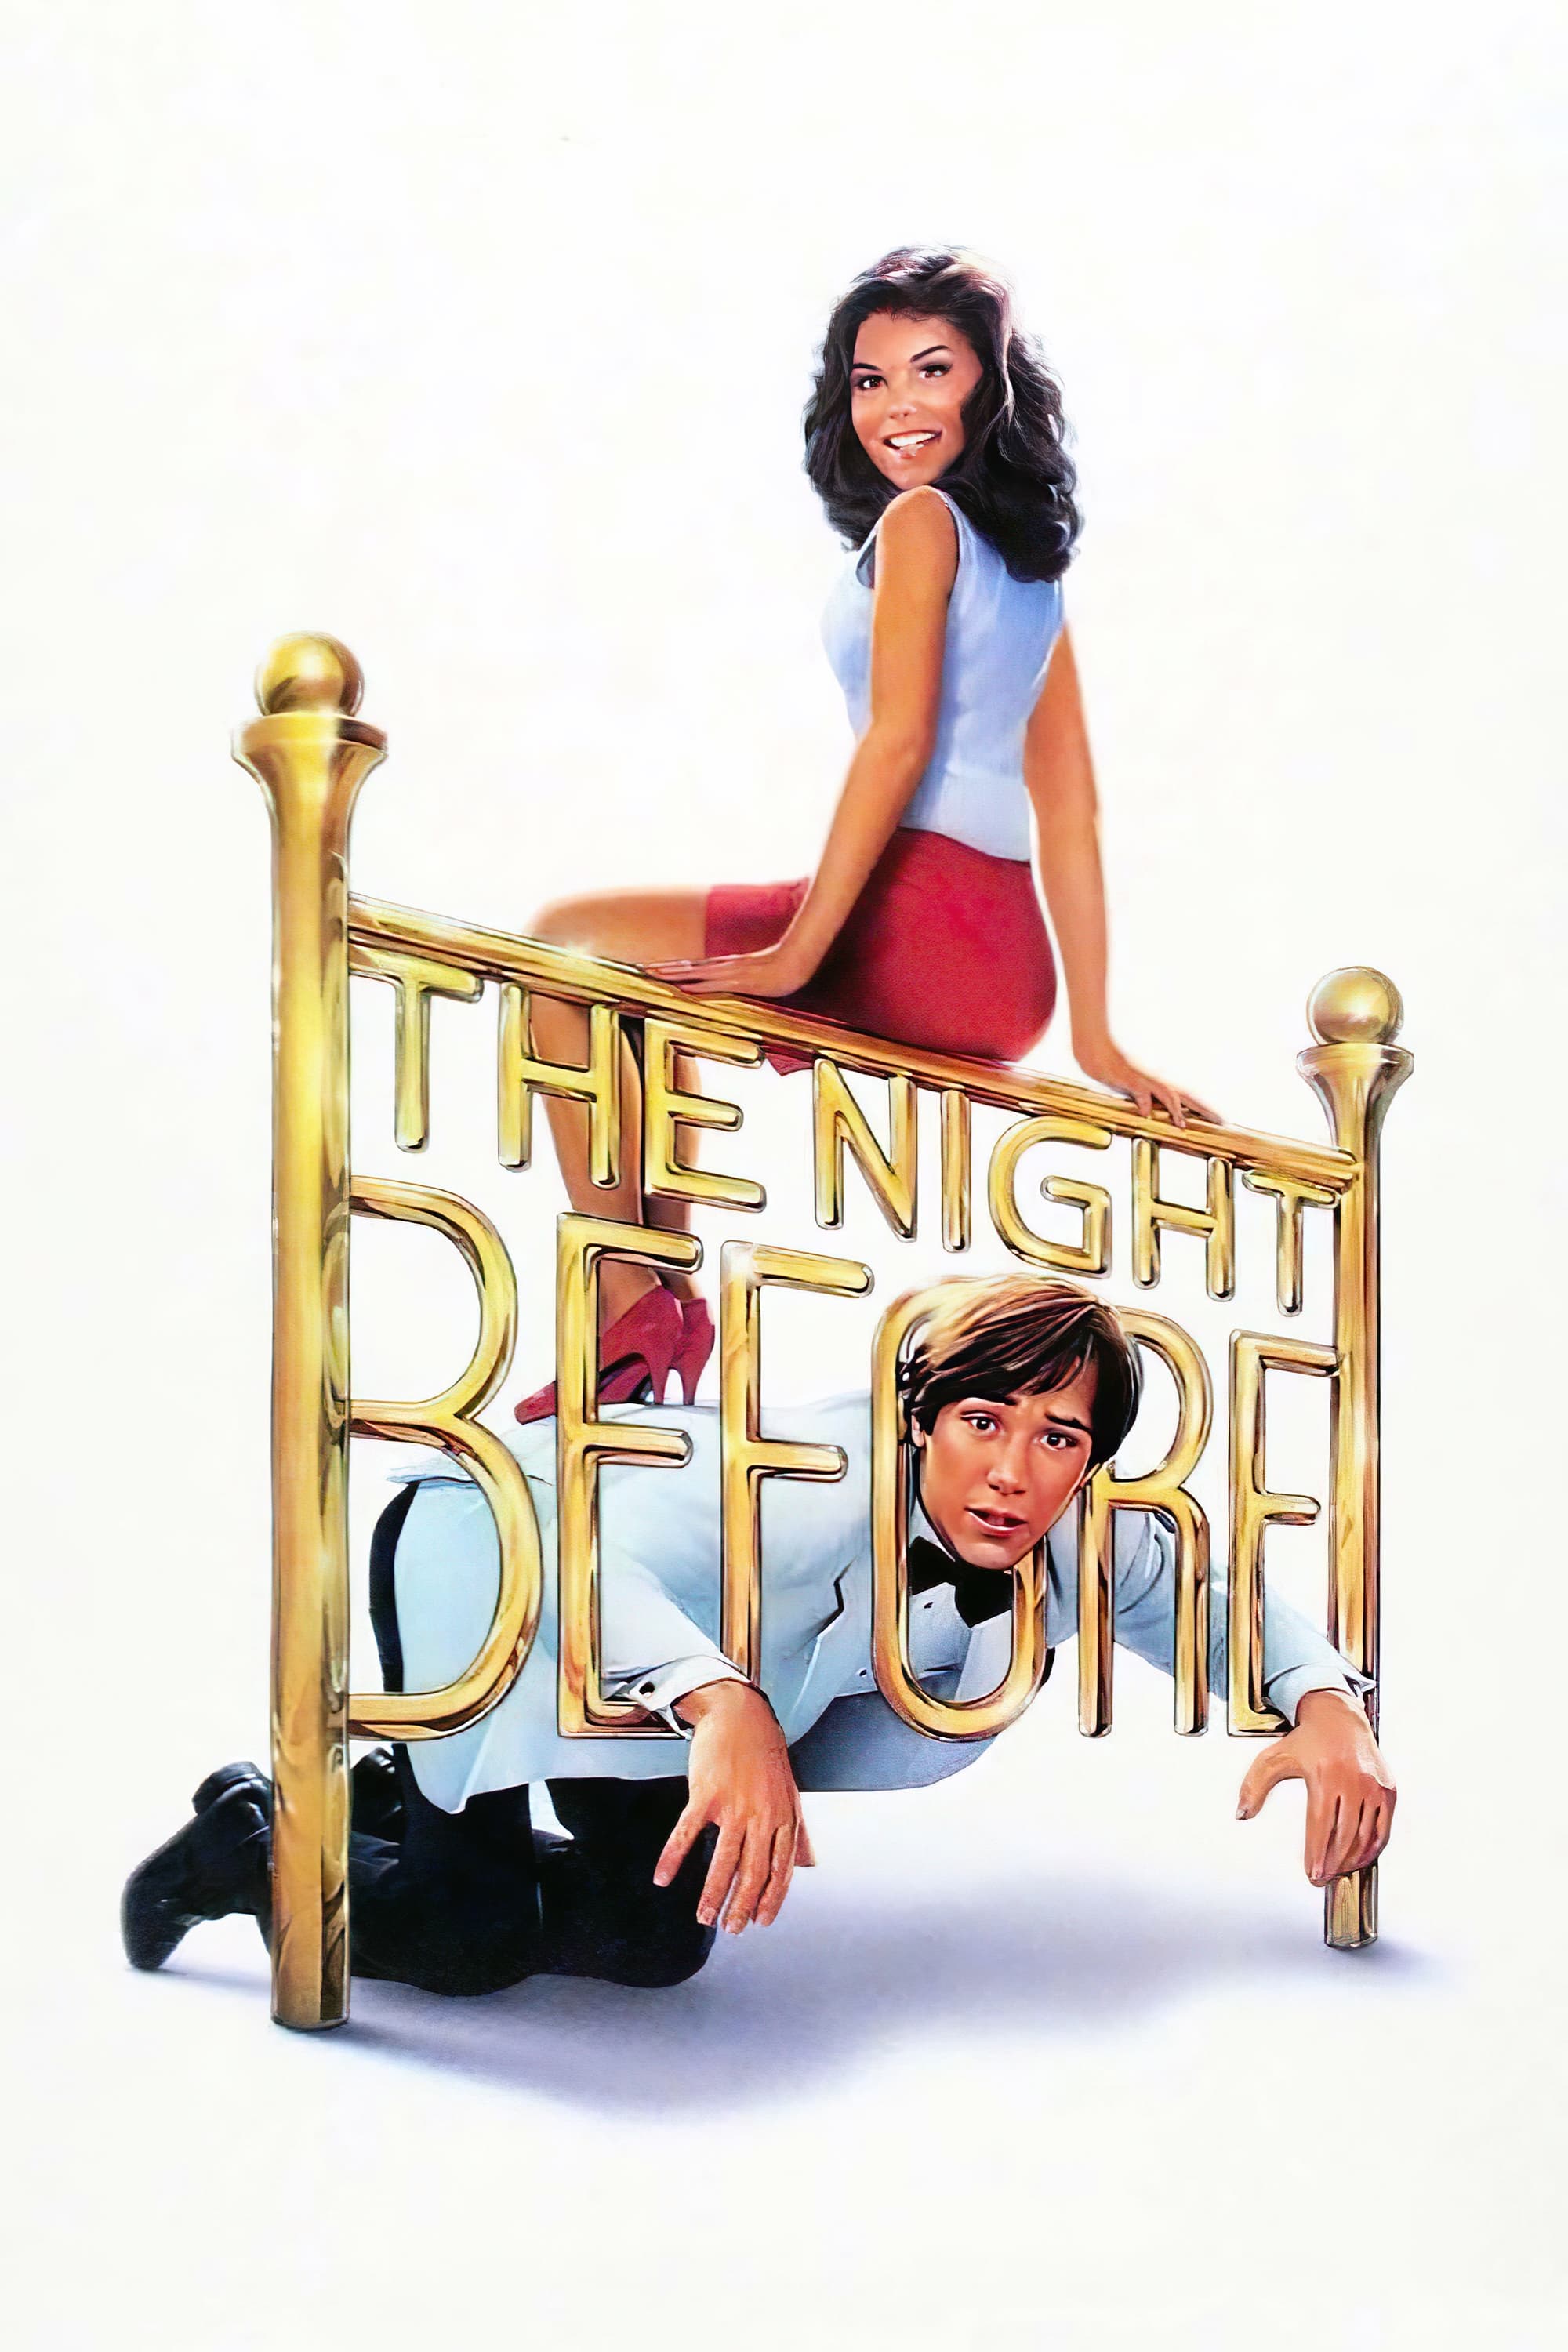 The Night Before (1988)